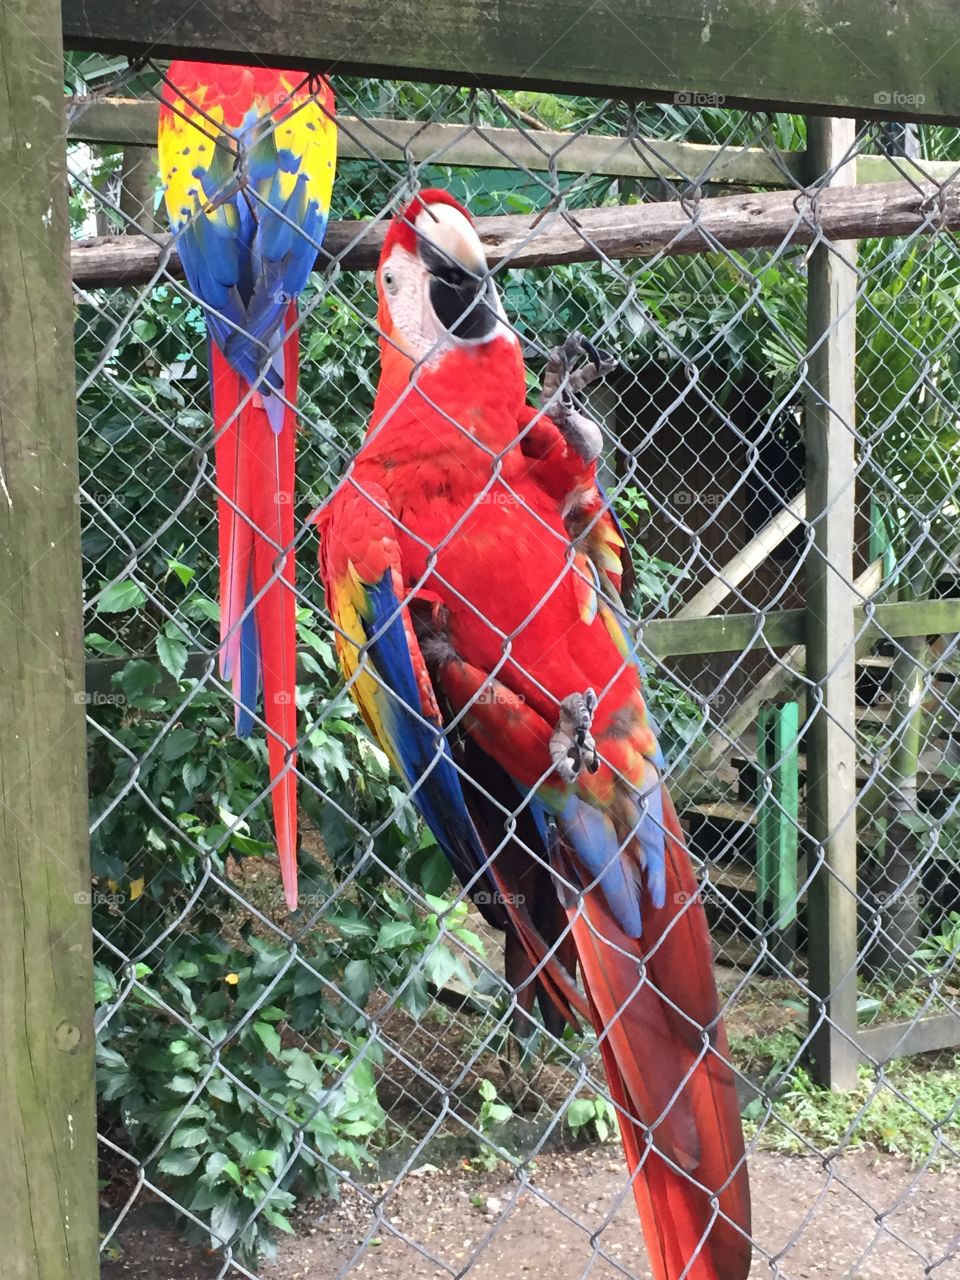 Visiting the zoo, this guy kept following us along the fence. 